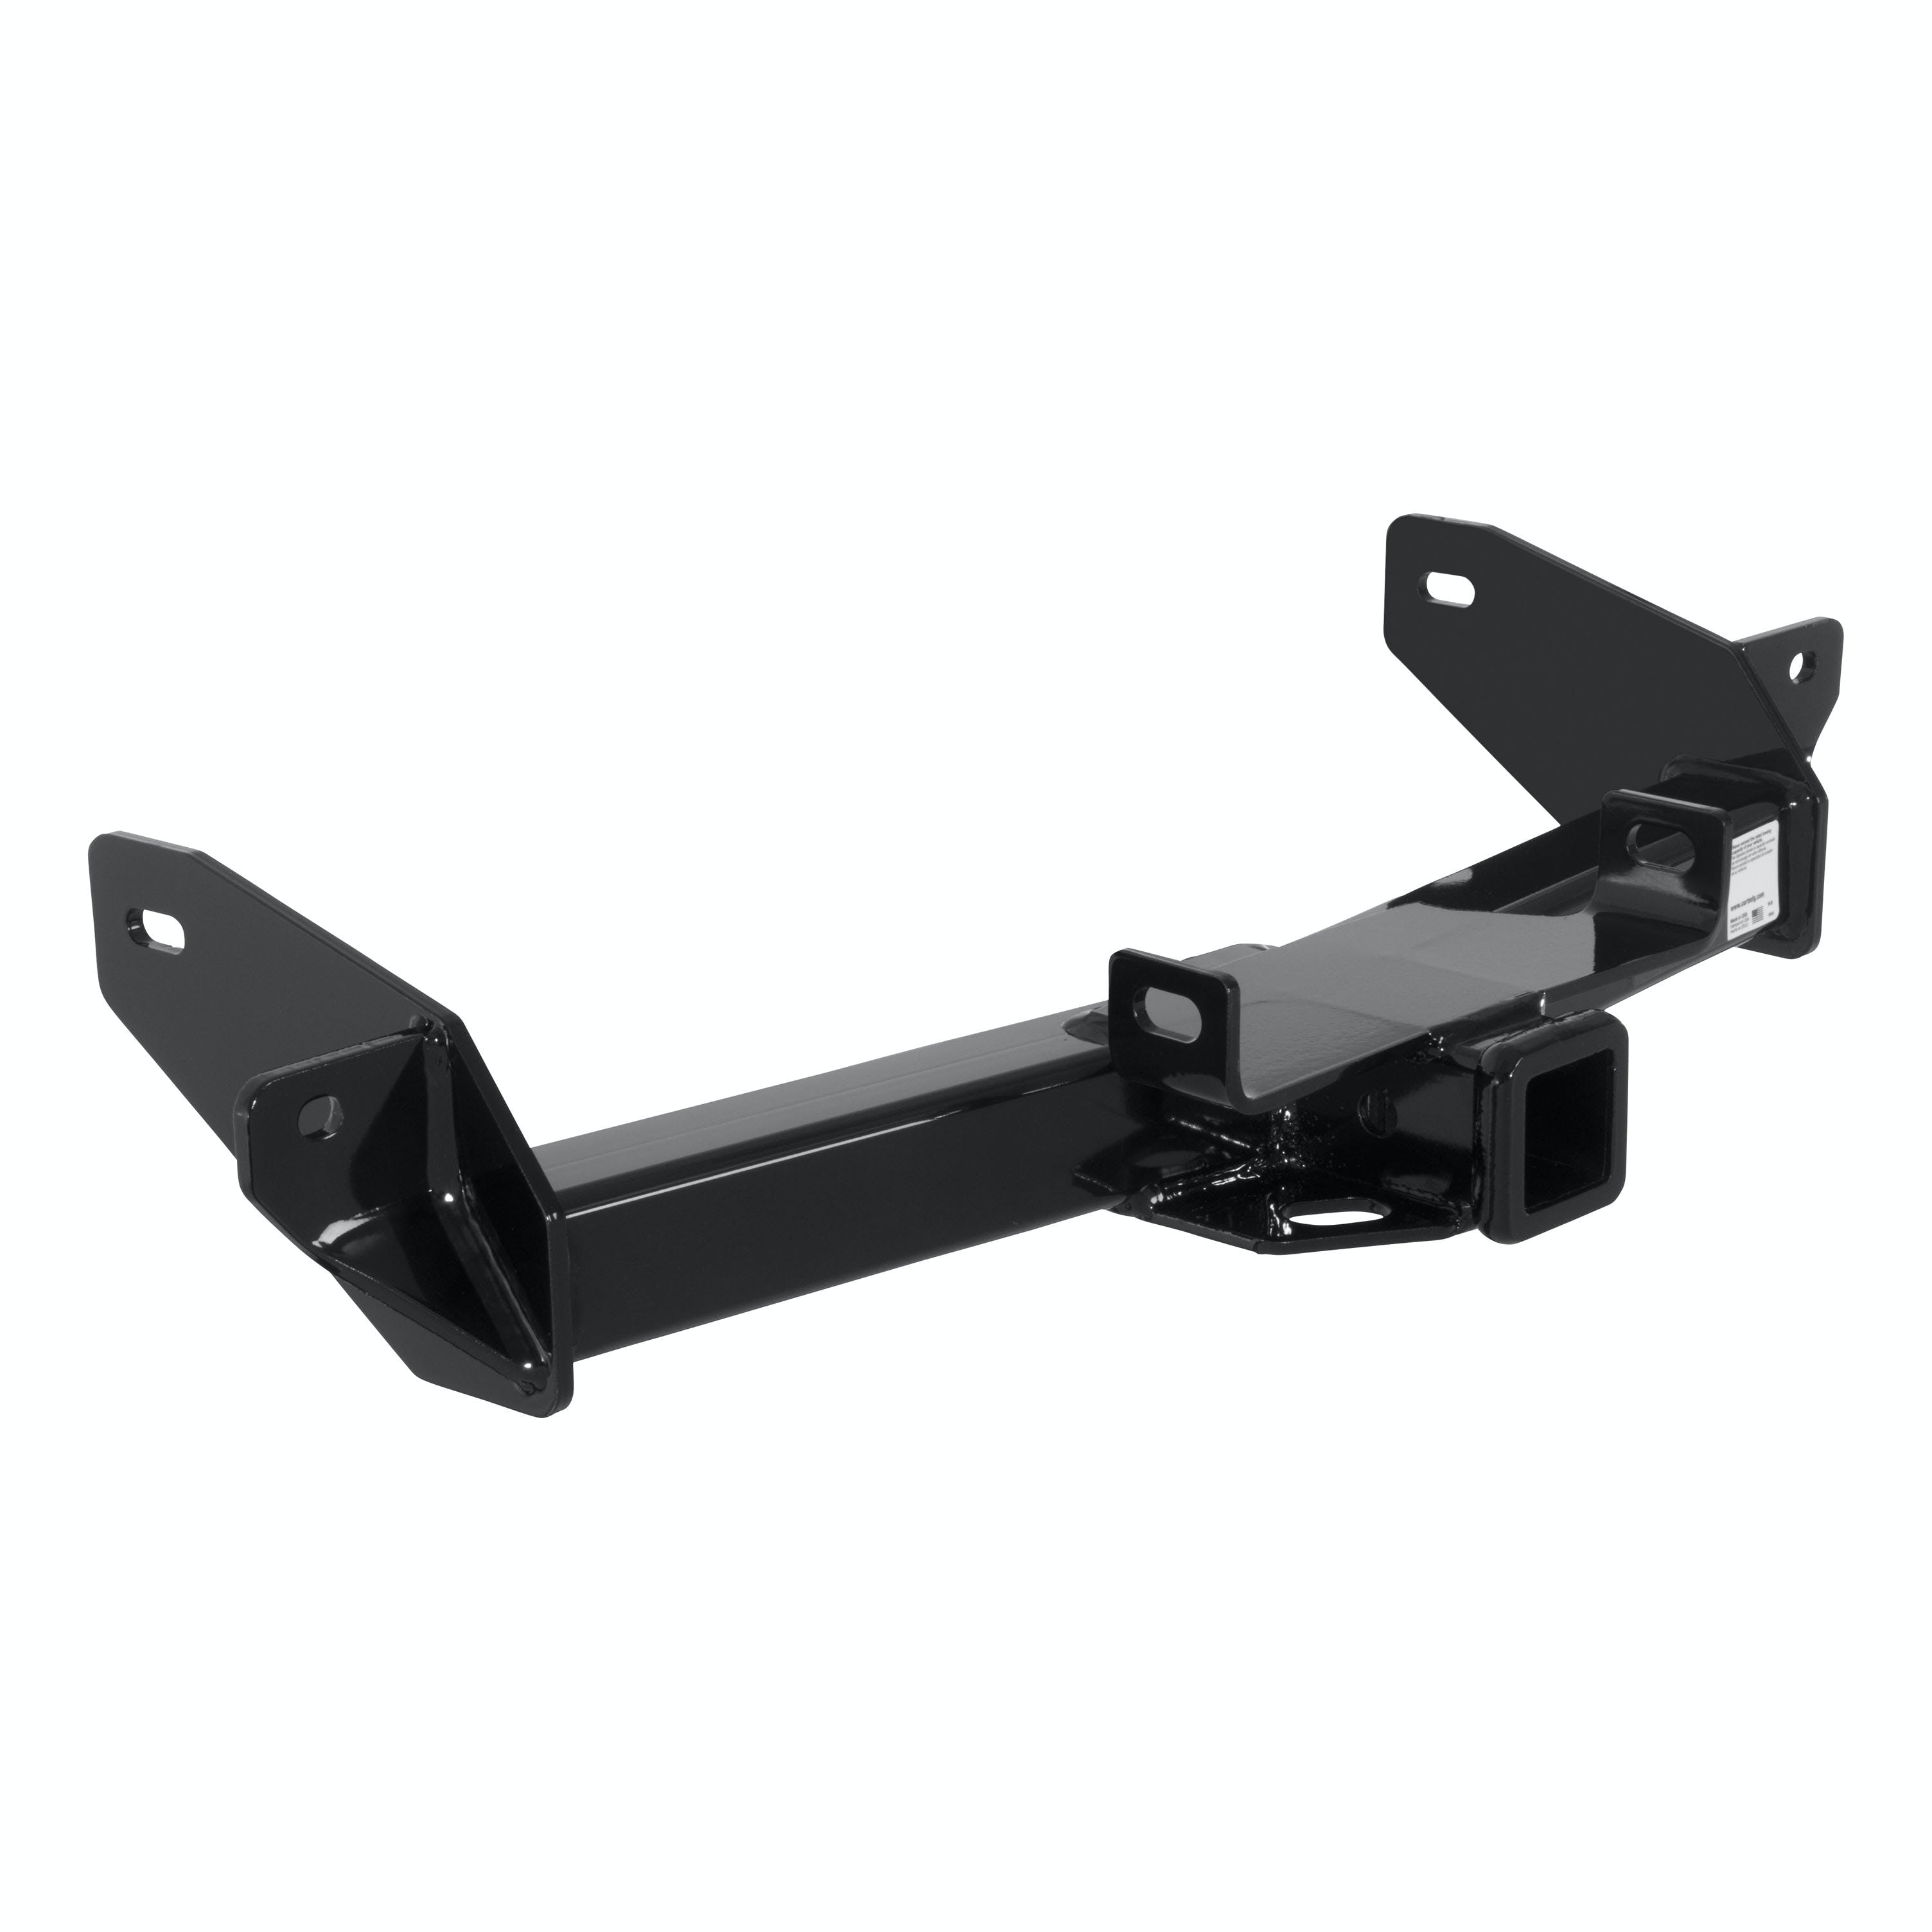 CURT 14360 Class 4 Trailer Hitch, 2 Receiver, Select Ford F-150, Lincoln Mark LT